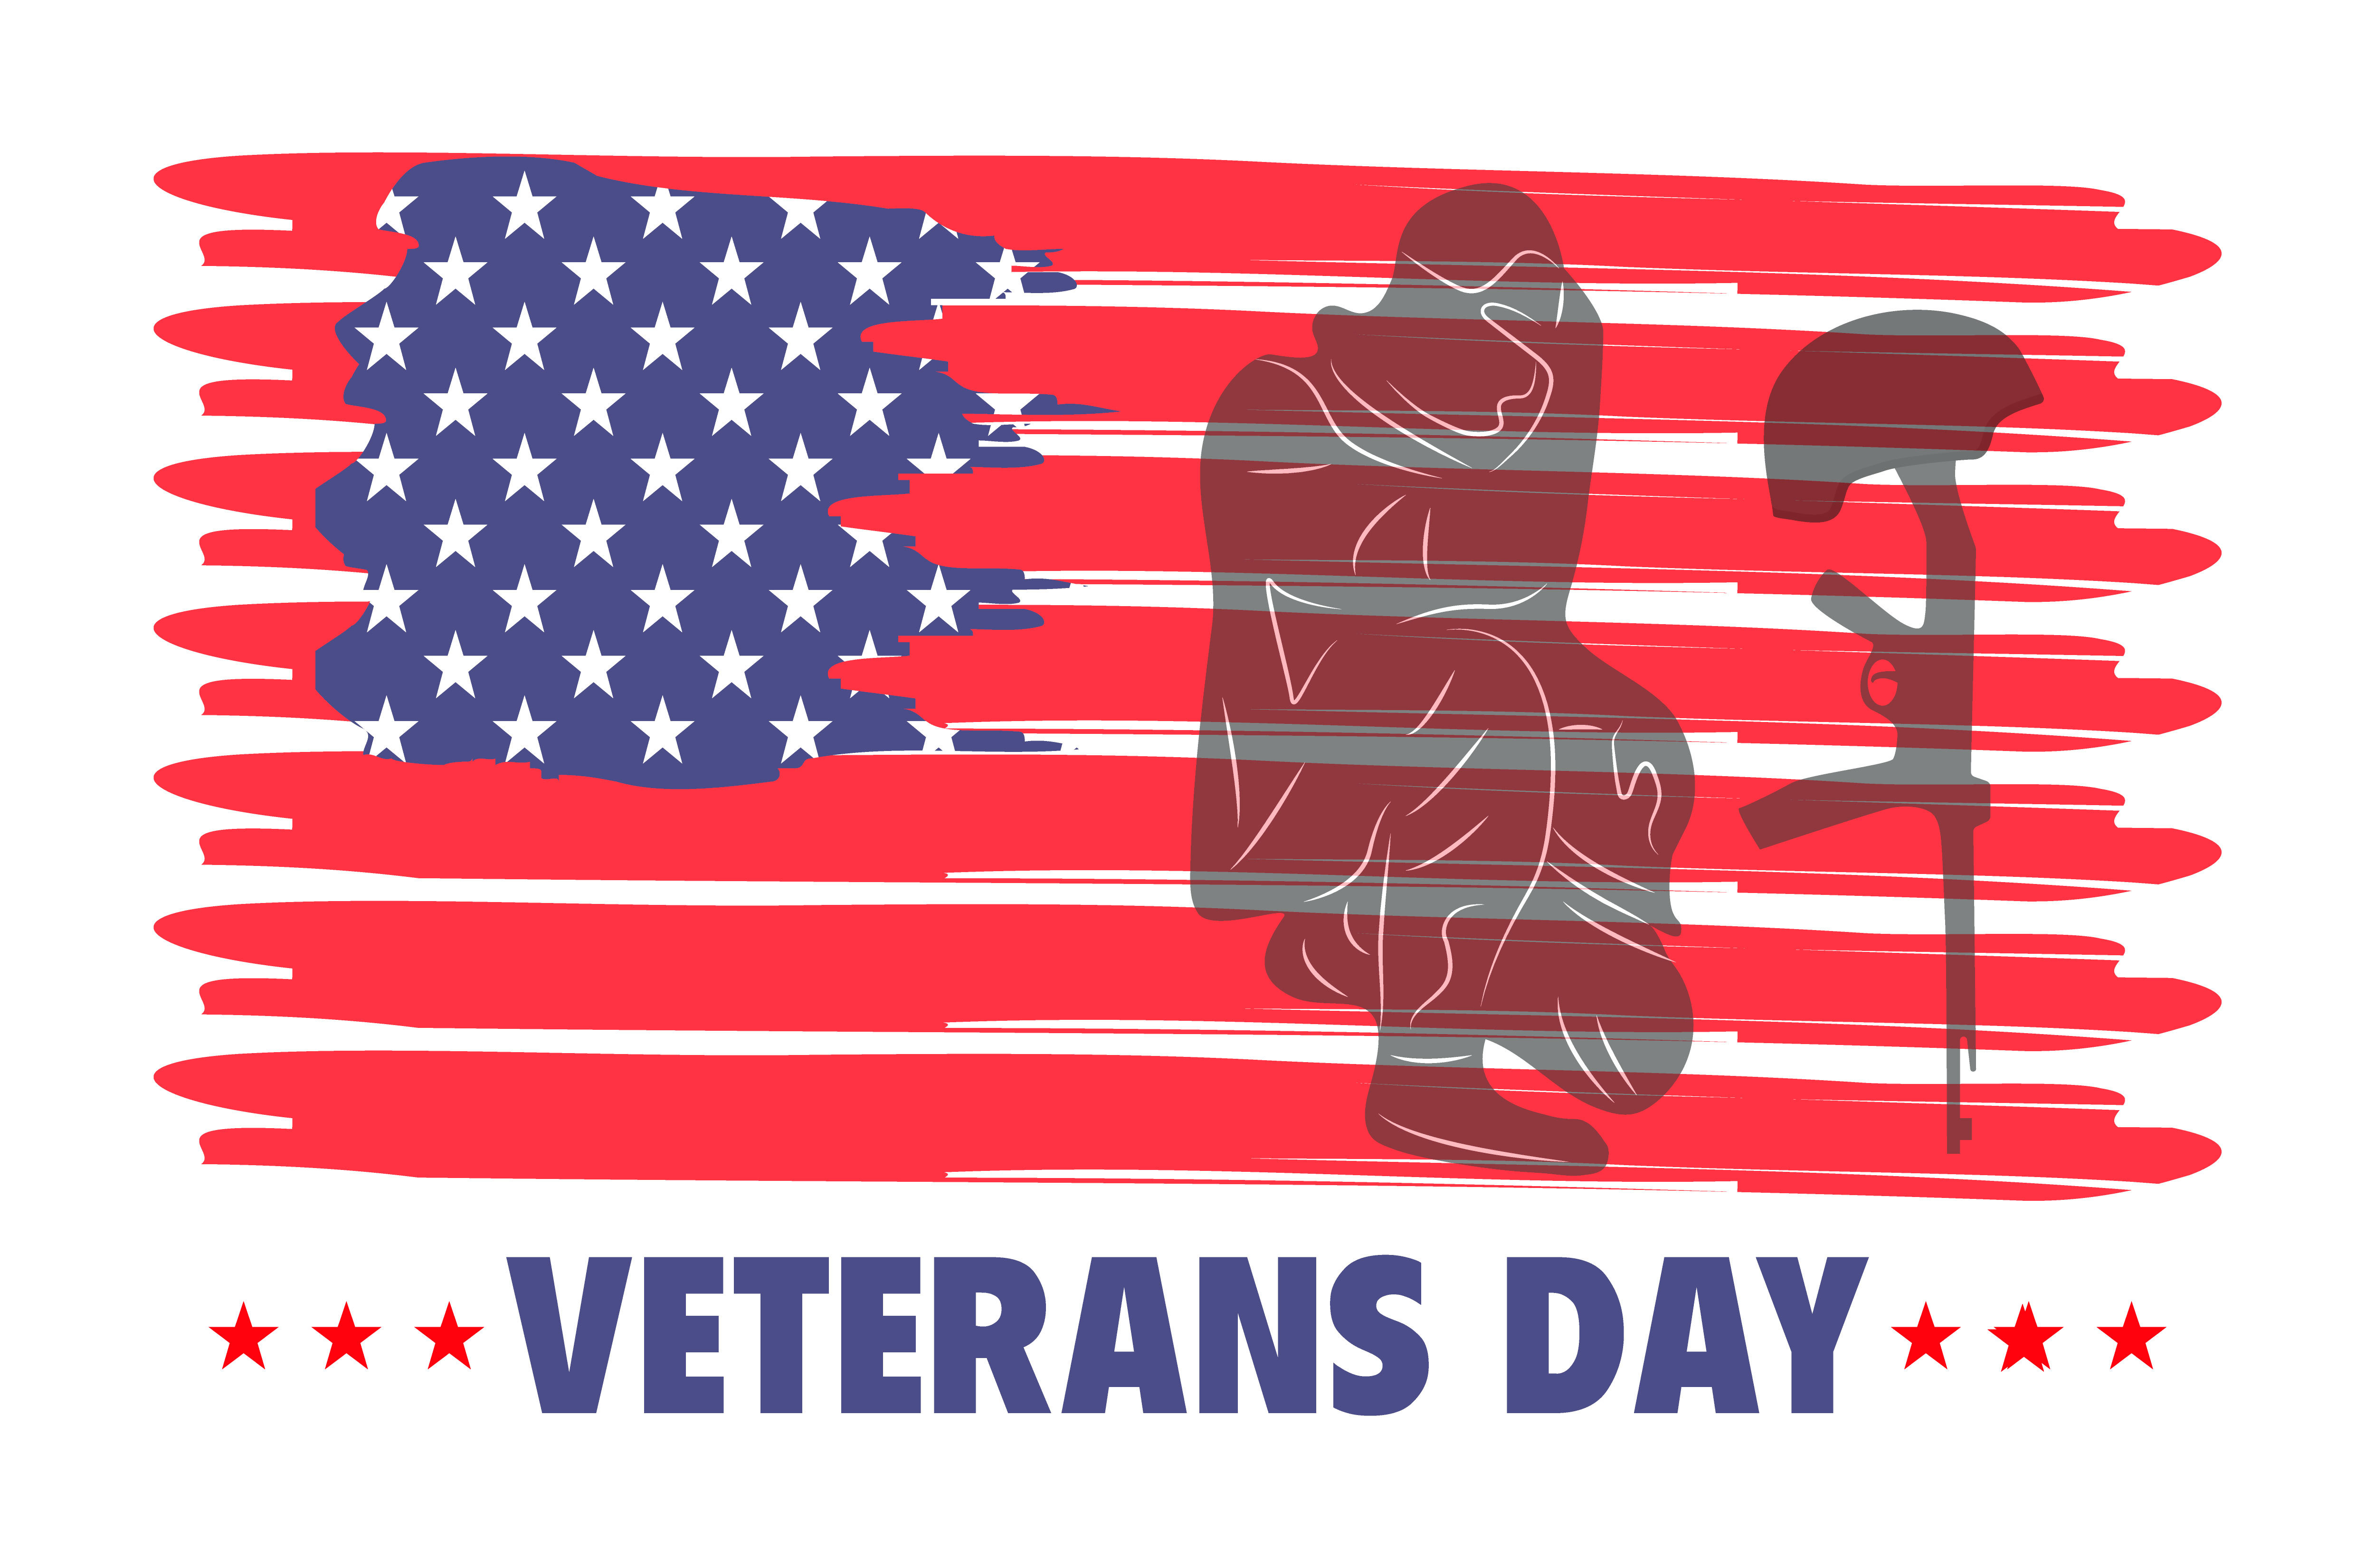 Veterans day concept vector. Military event is celebrated in 11th November in United States. Soldier grieves for a friend who died in the war. The helmet hangs on the rifle. USA flag background.. Veterans day concept vector. Military event is celebrated in 11th November in United States. Soldier grieves for a friend who died in the war. The helmet hangs on the rifle. USA flag